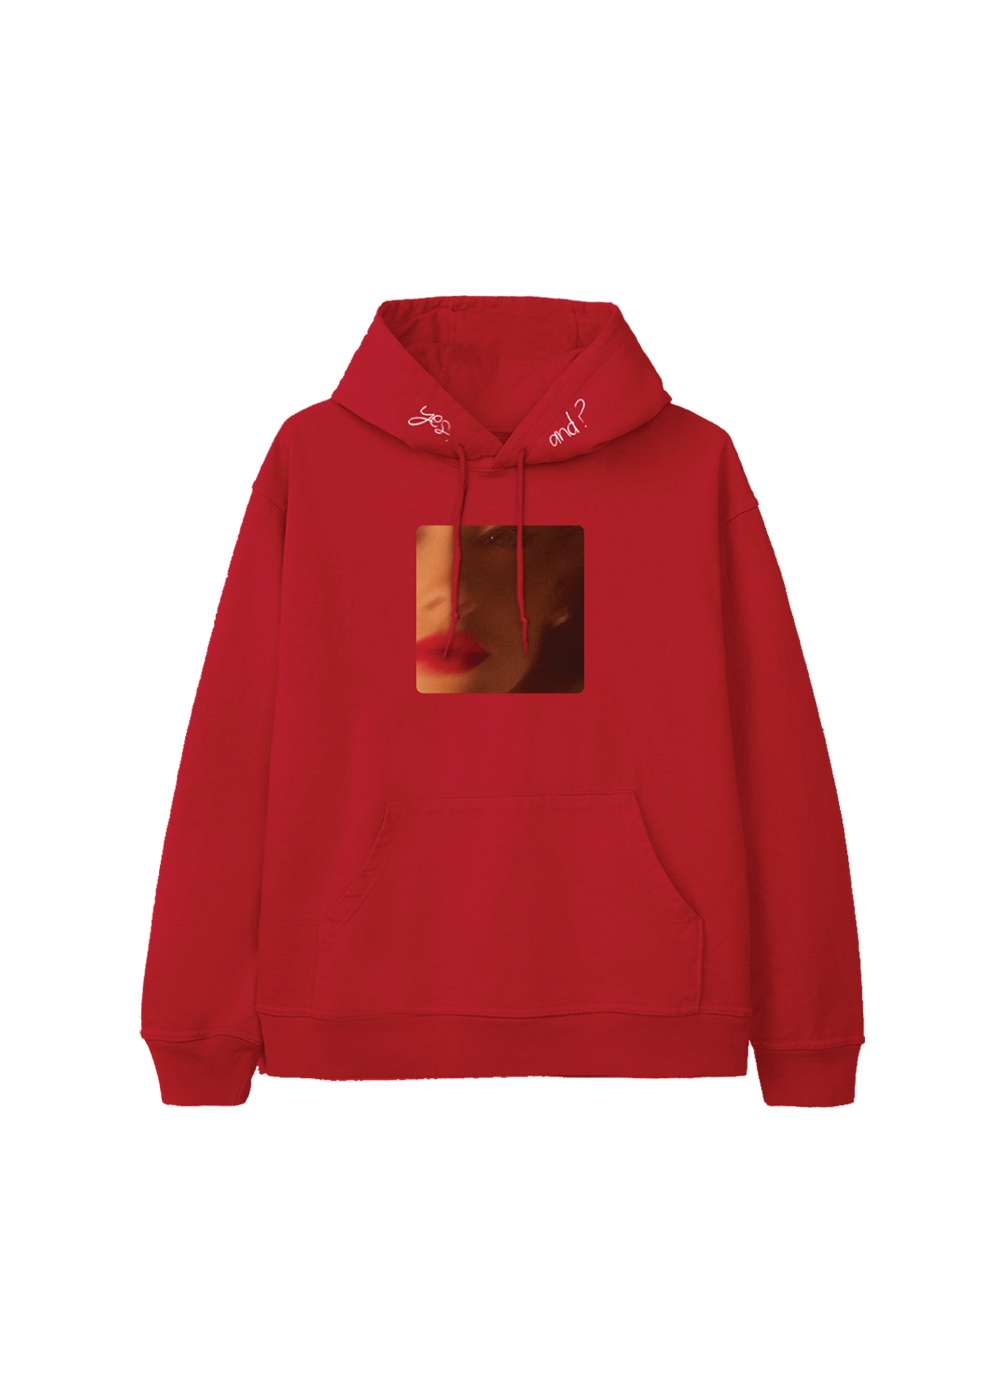 Ariana Grande yes, and? cover hoodie